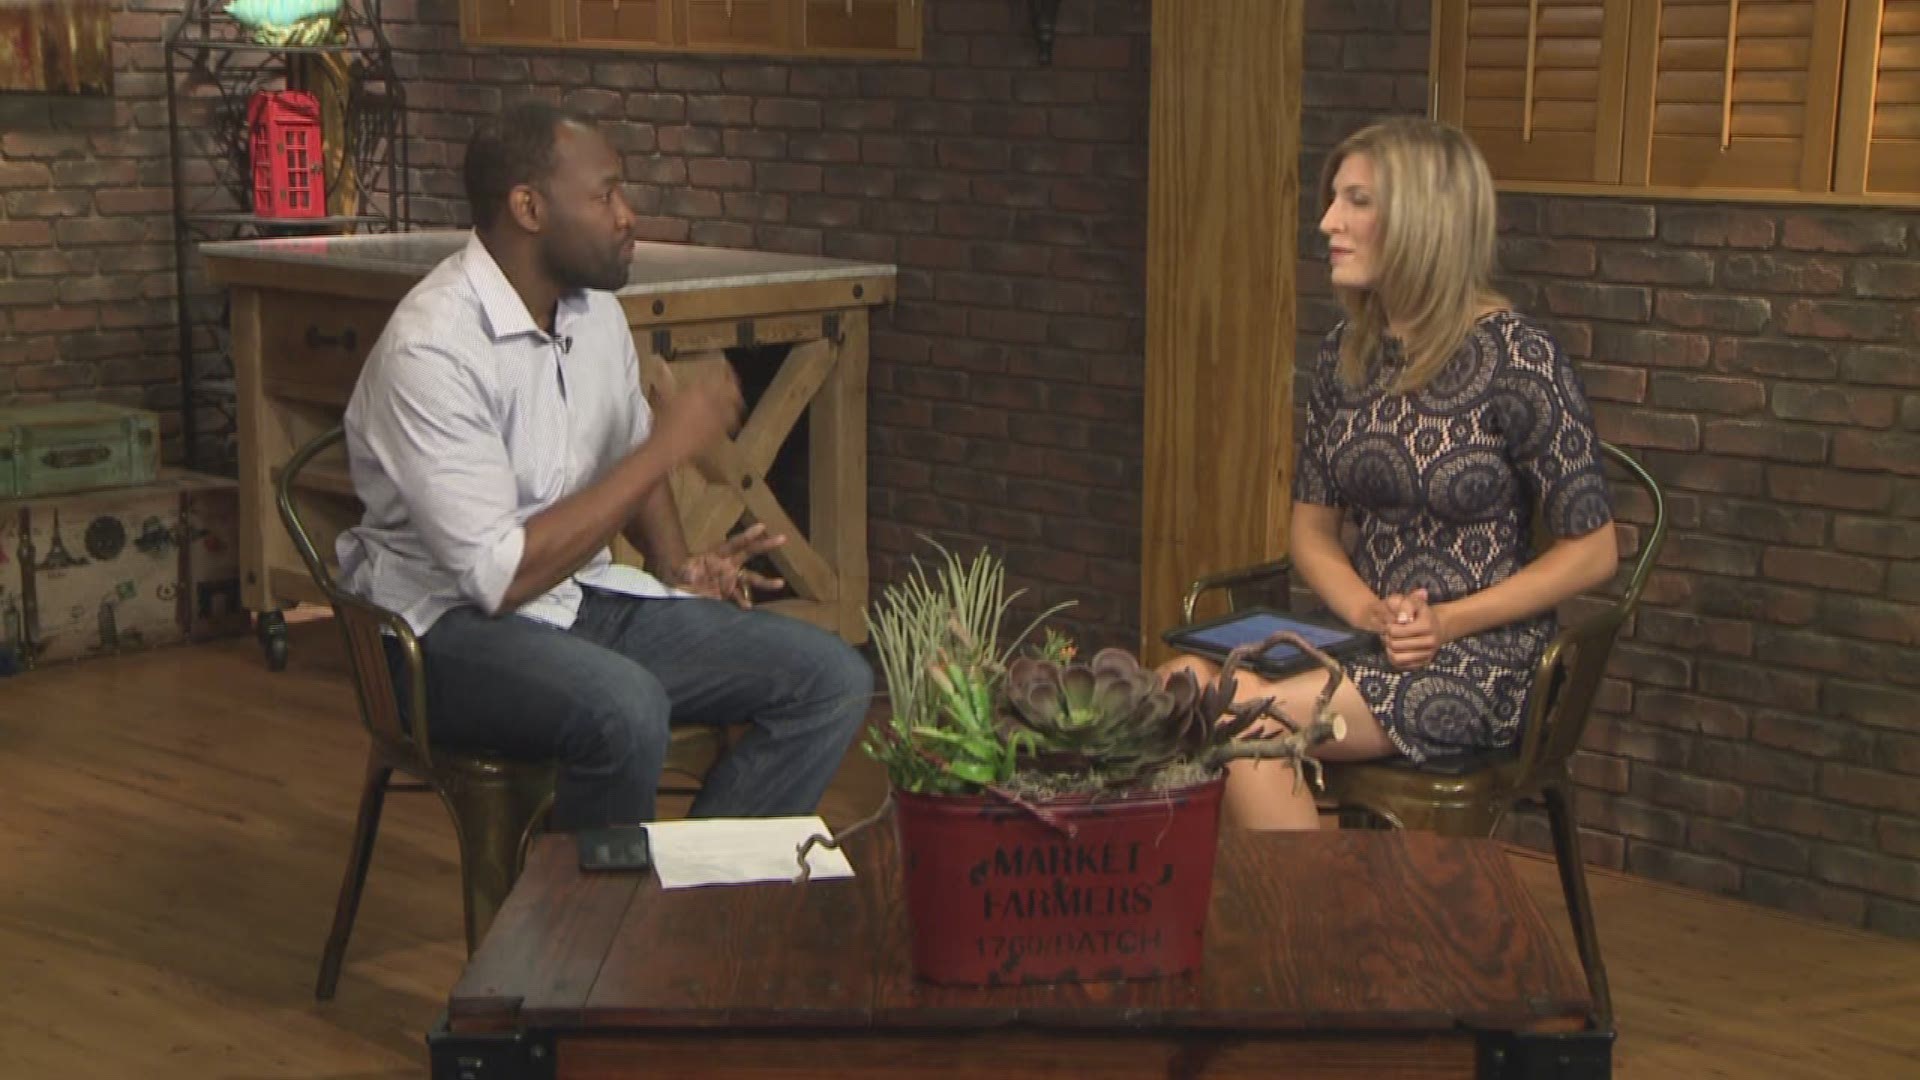 Charlie Simpson with the Arkansas Relationship Counseling Center joined THV11 This Morning to explain the challenges with living as roommates.